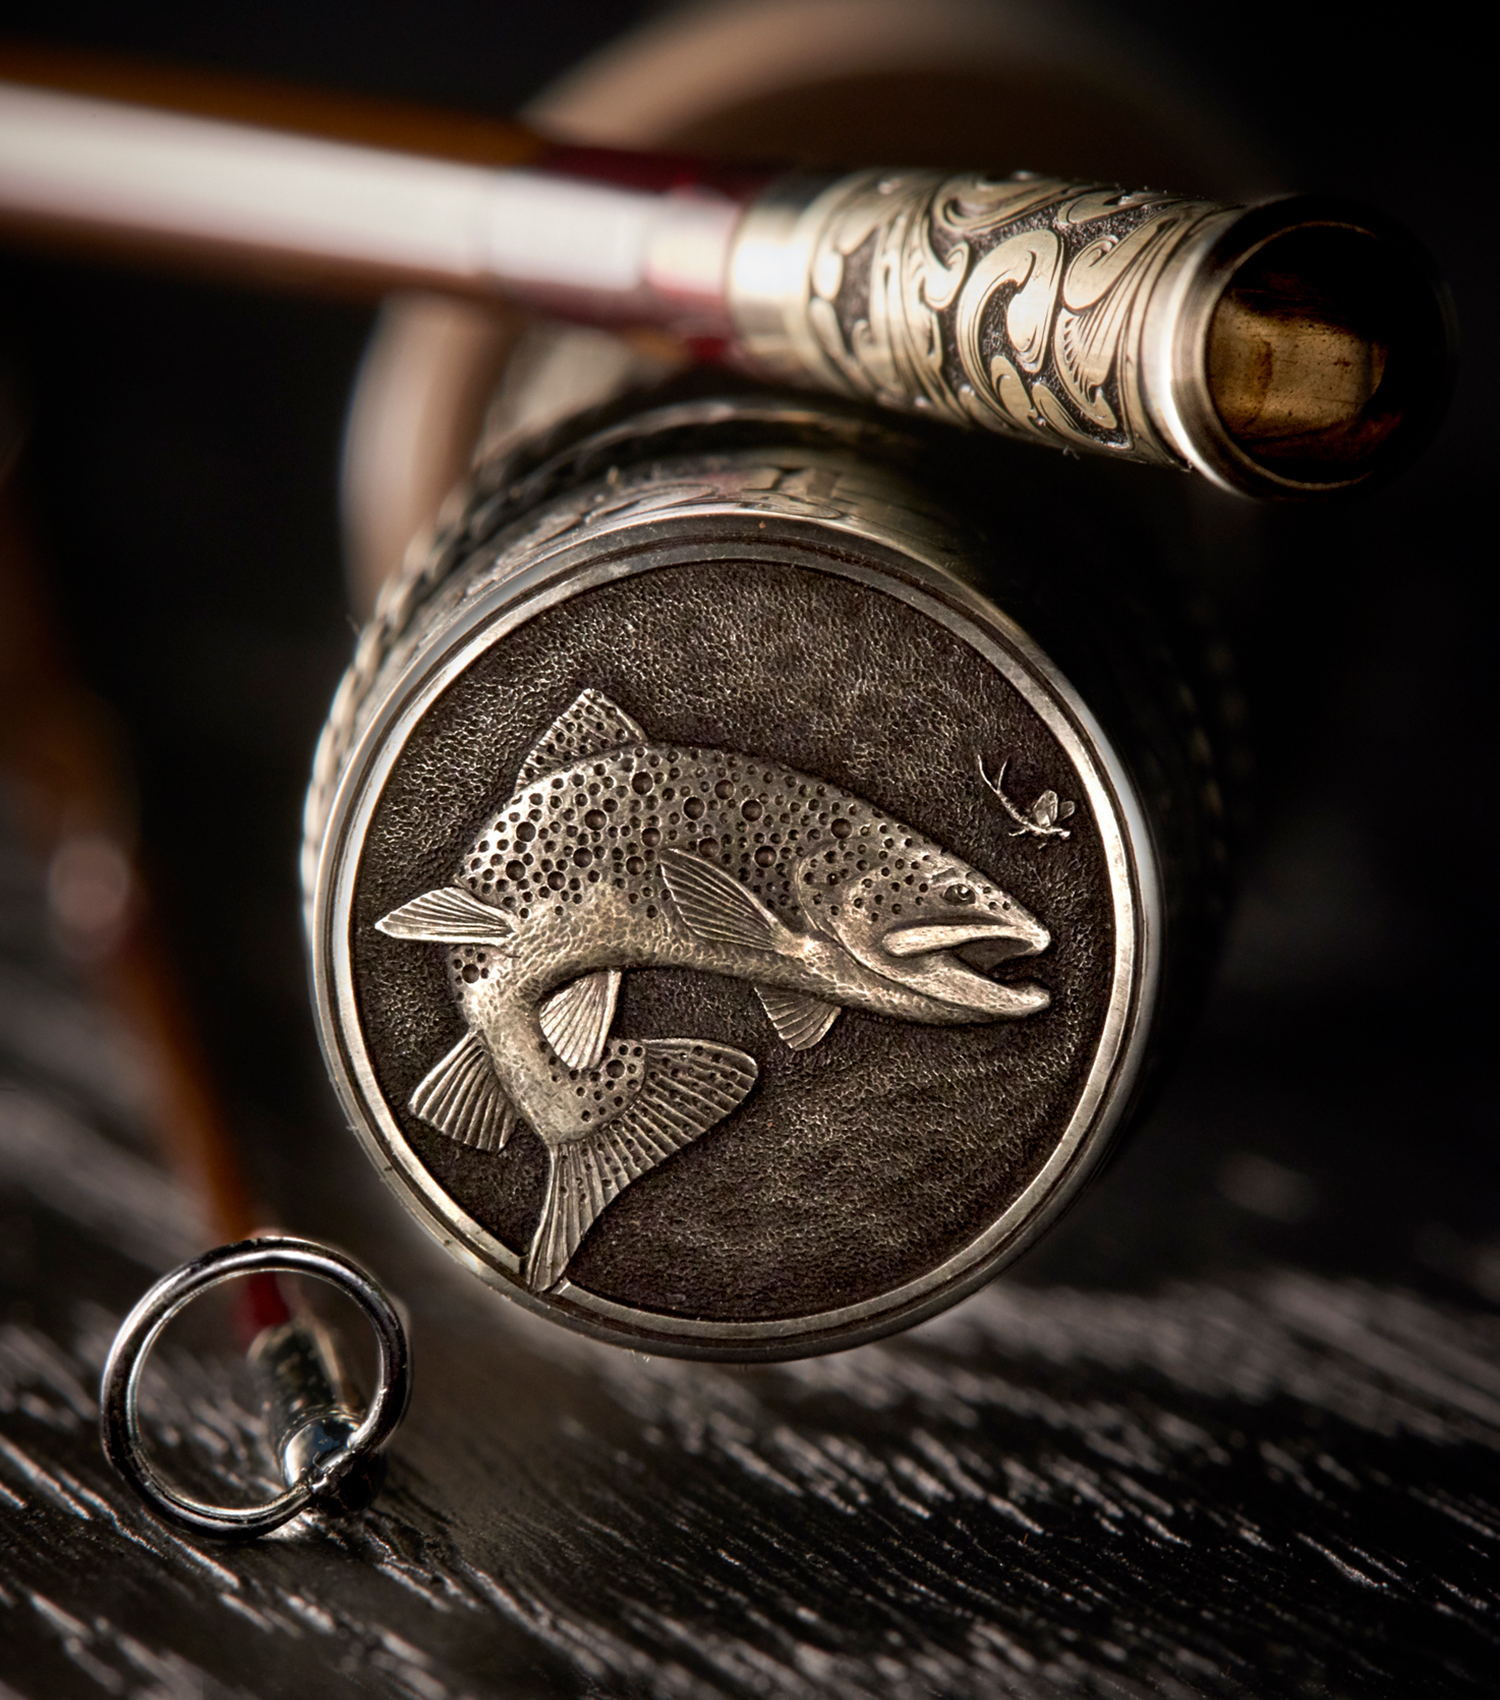 The end of a custom fly fishing rod from Bill Oyster engraved with a fish